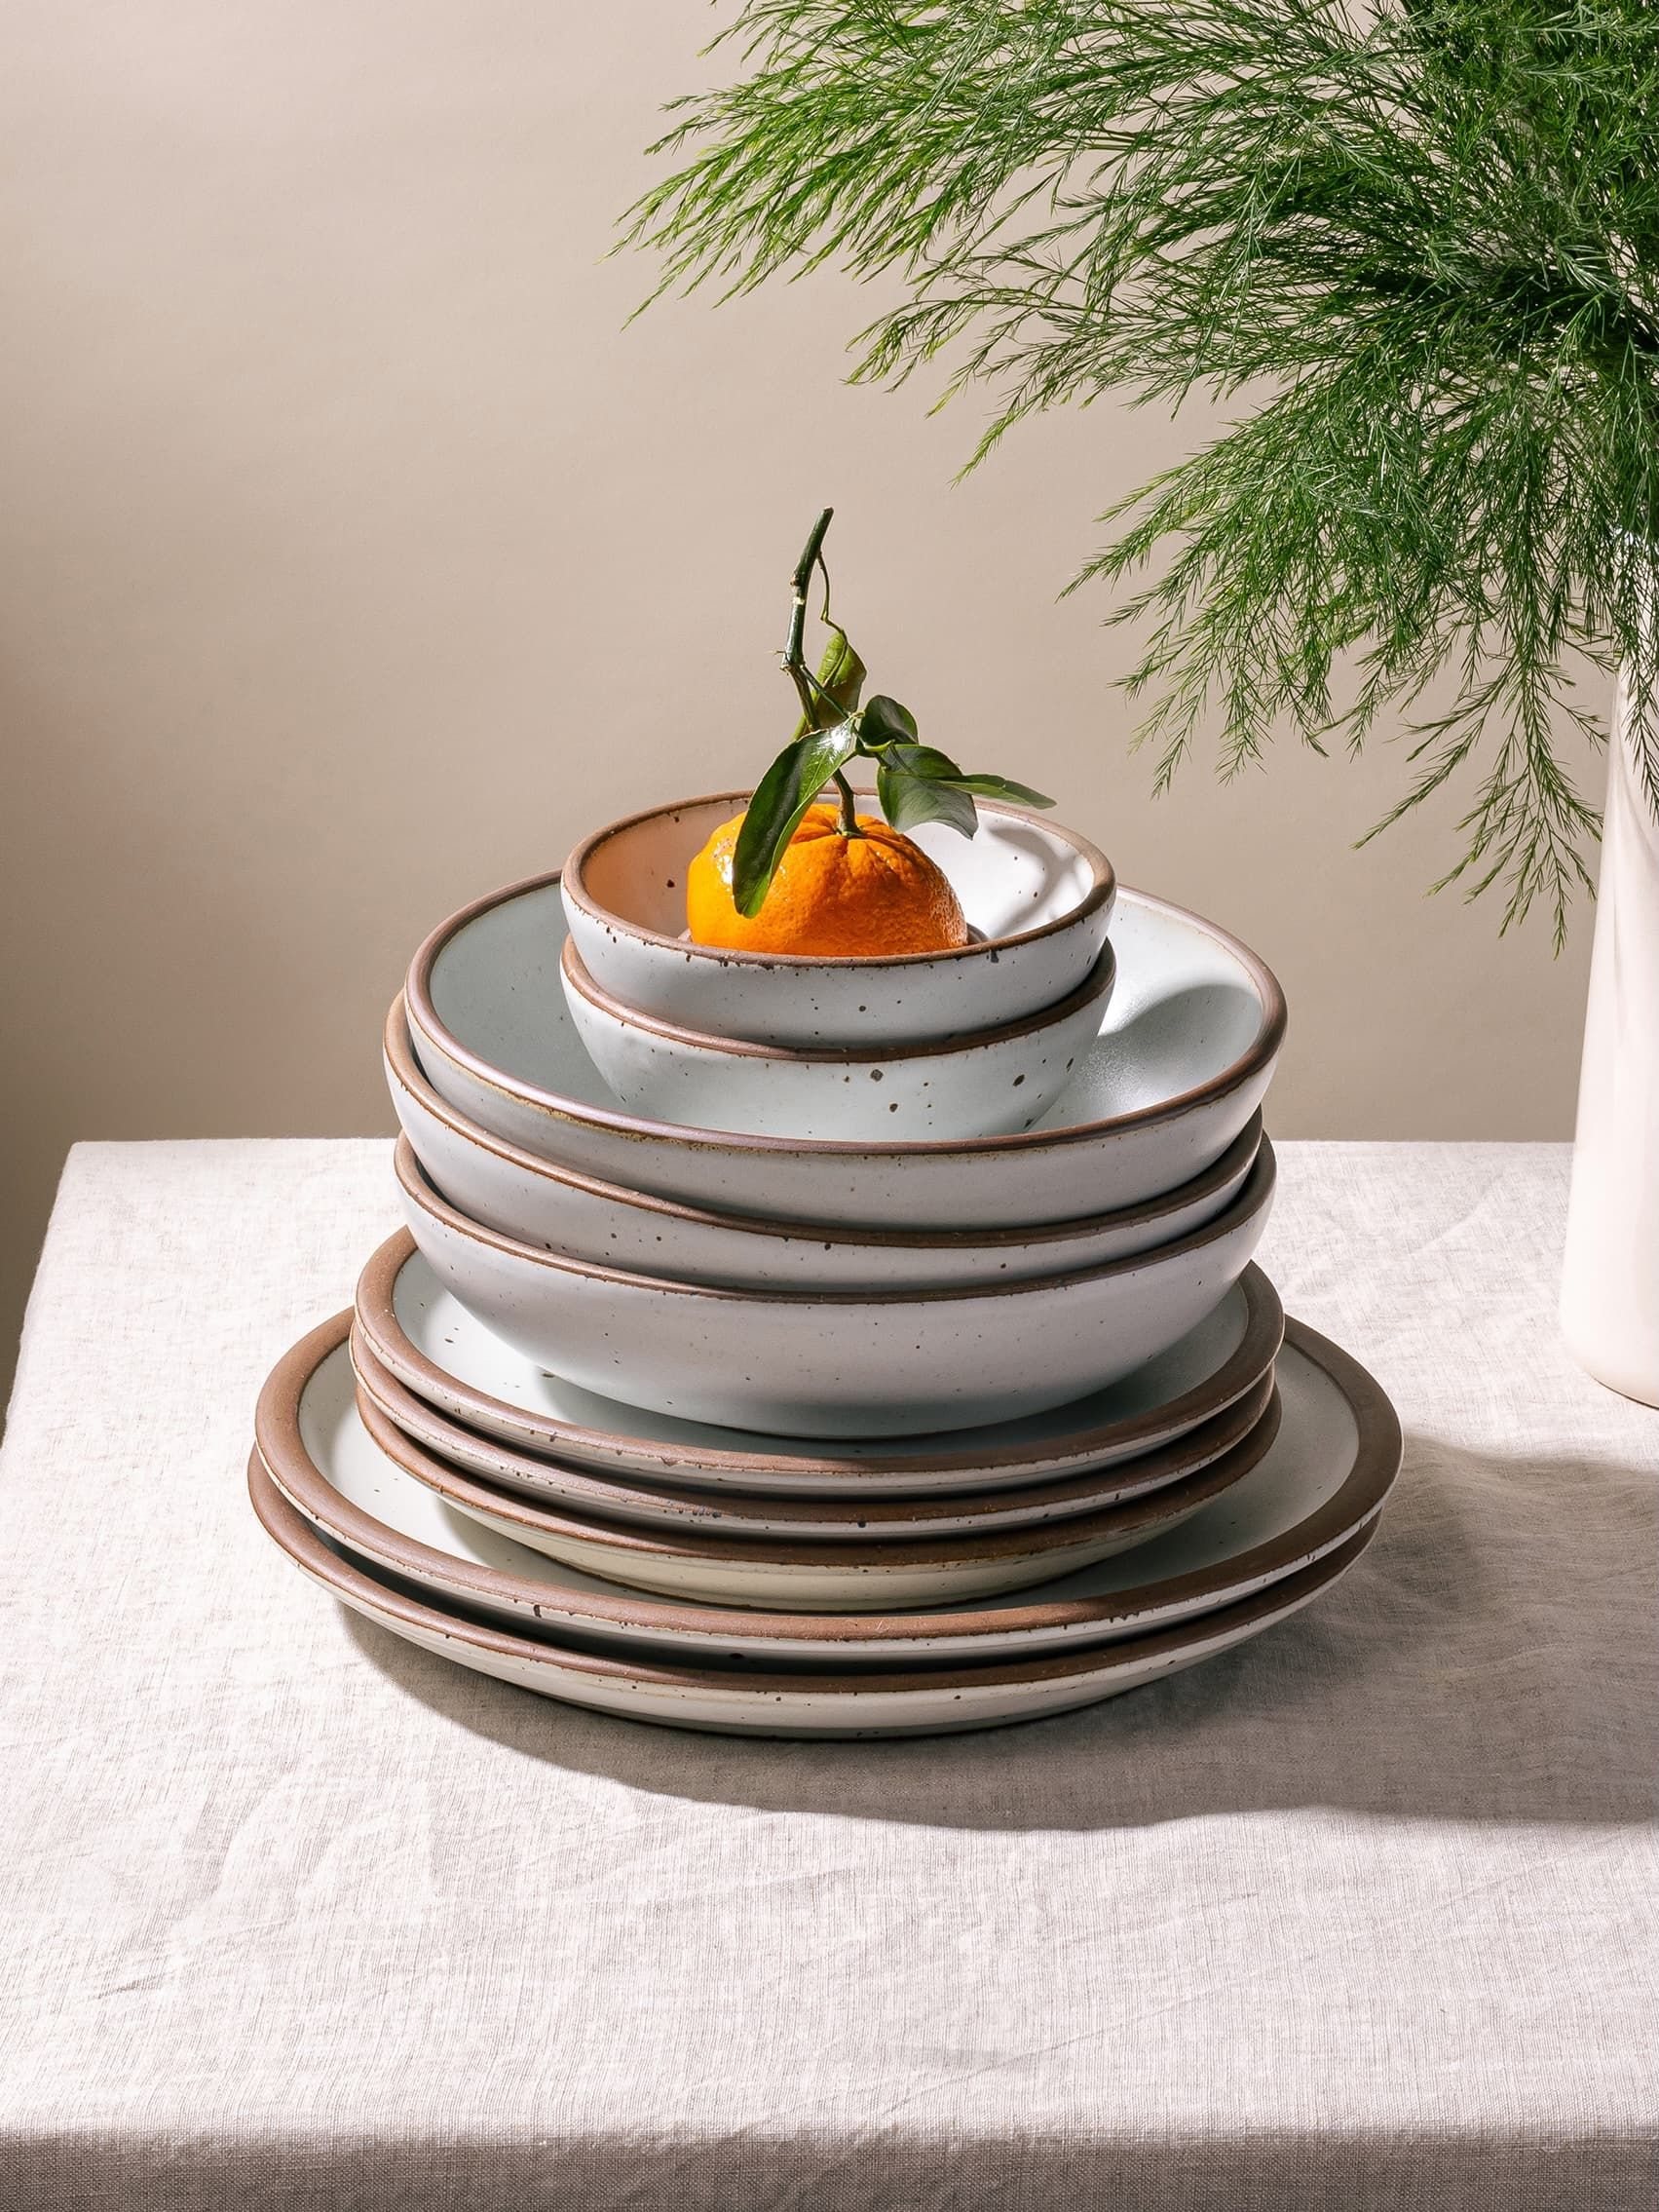 On a table with a linen tablecloth, there is a large stack of ceramic plates and shallow bowls, all in off-white or cool white colors, with an orange sitting on top. A cream pitcher with a fern sits to the right.